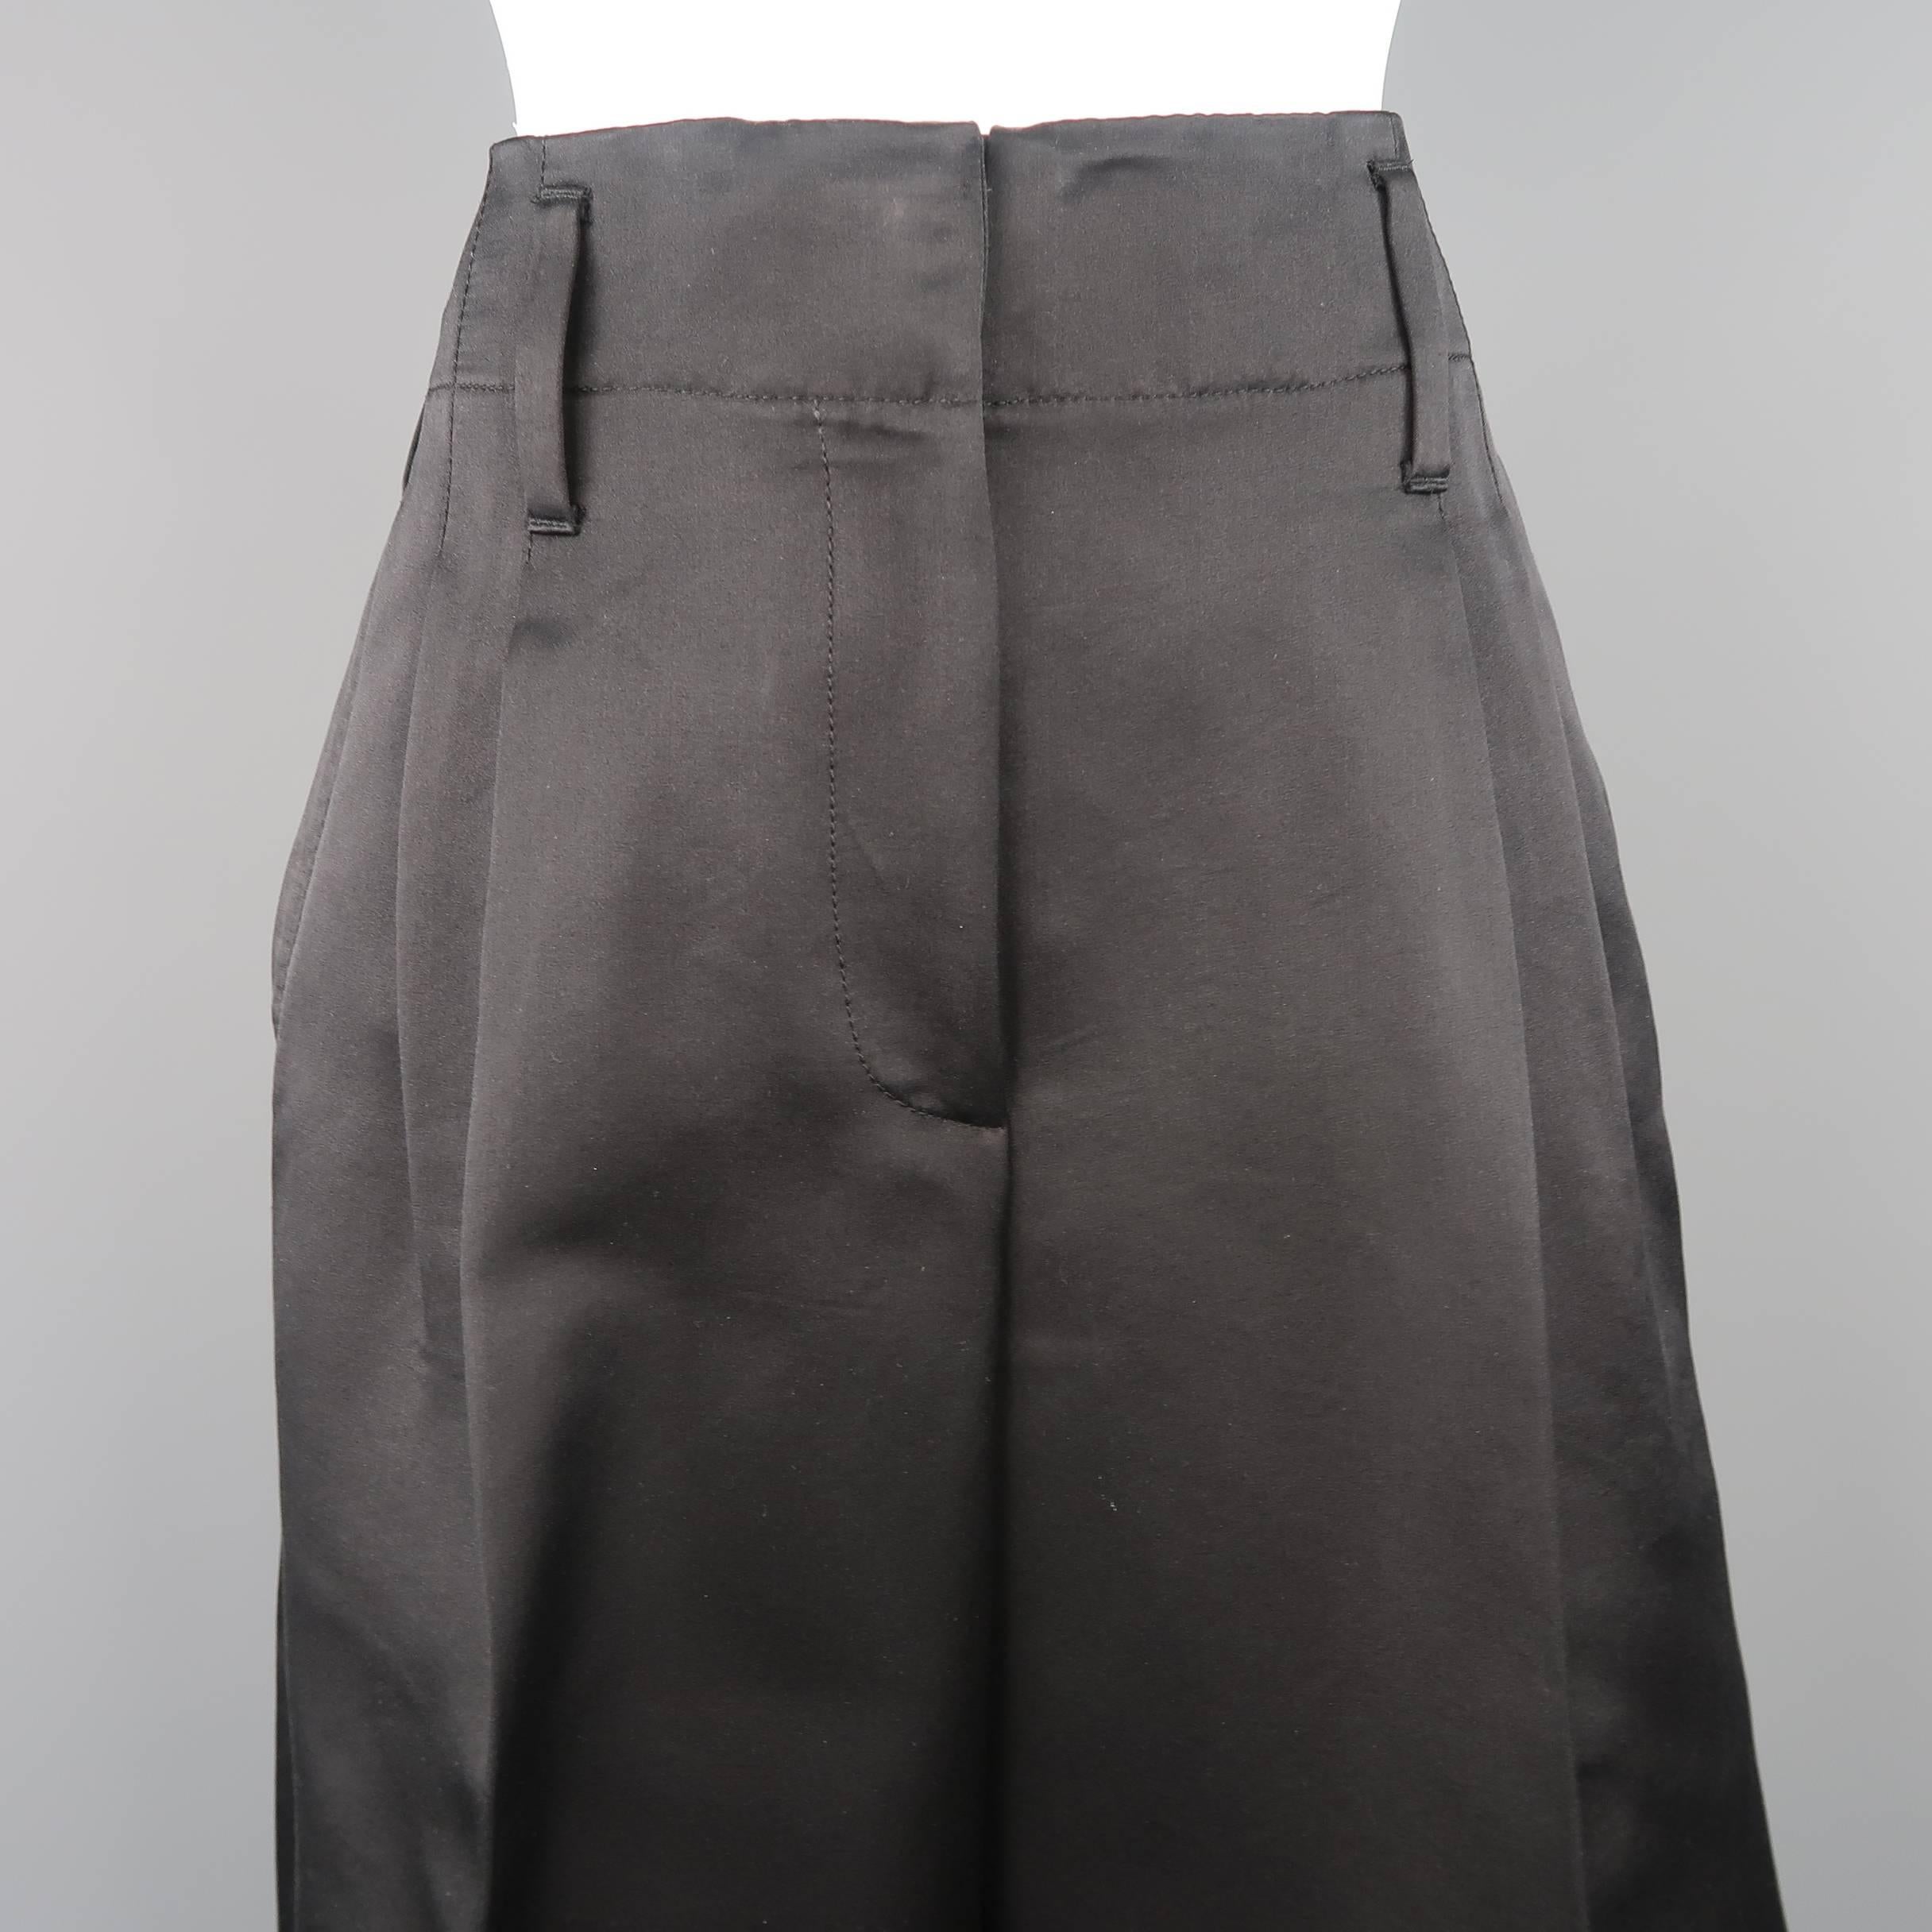 MARC JACOBS culottes come in black silk satin with a double pleat, wide leg, and cuffed hem. Made in USA.
 
Excellent Pre-Owned Condition.
Marked: 6
 
Measurements:
 
Waist: 30 in.
Rise: 13 in.
Inseam:  23 in.
Leg Opening: 31 in.
